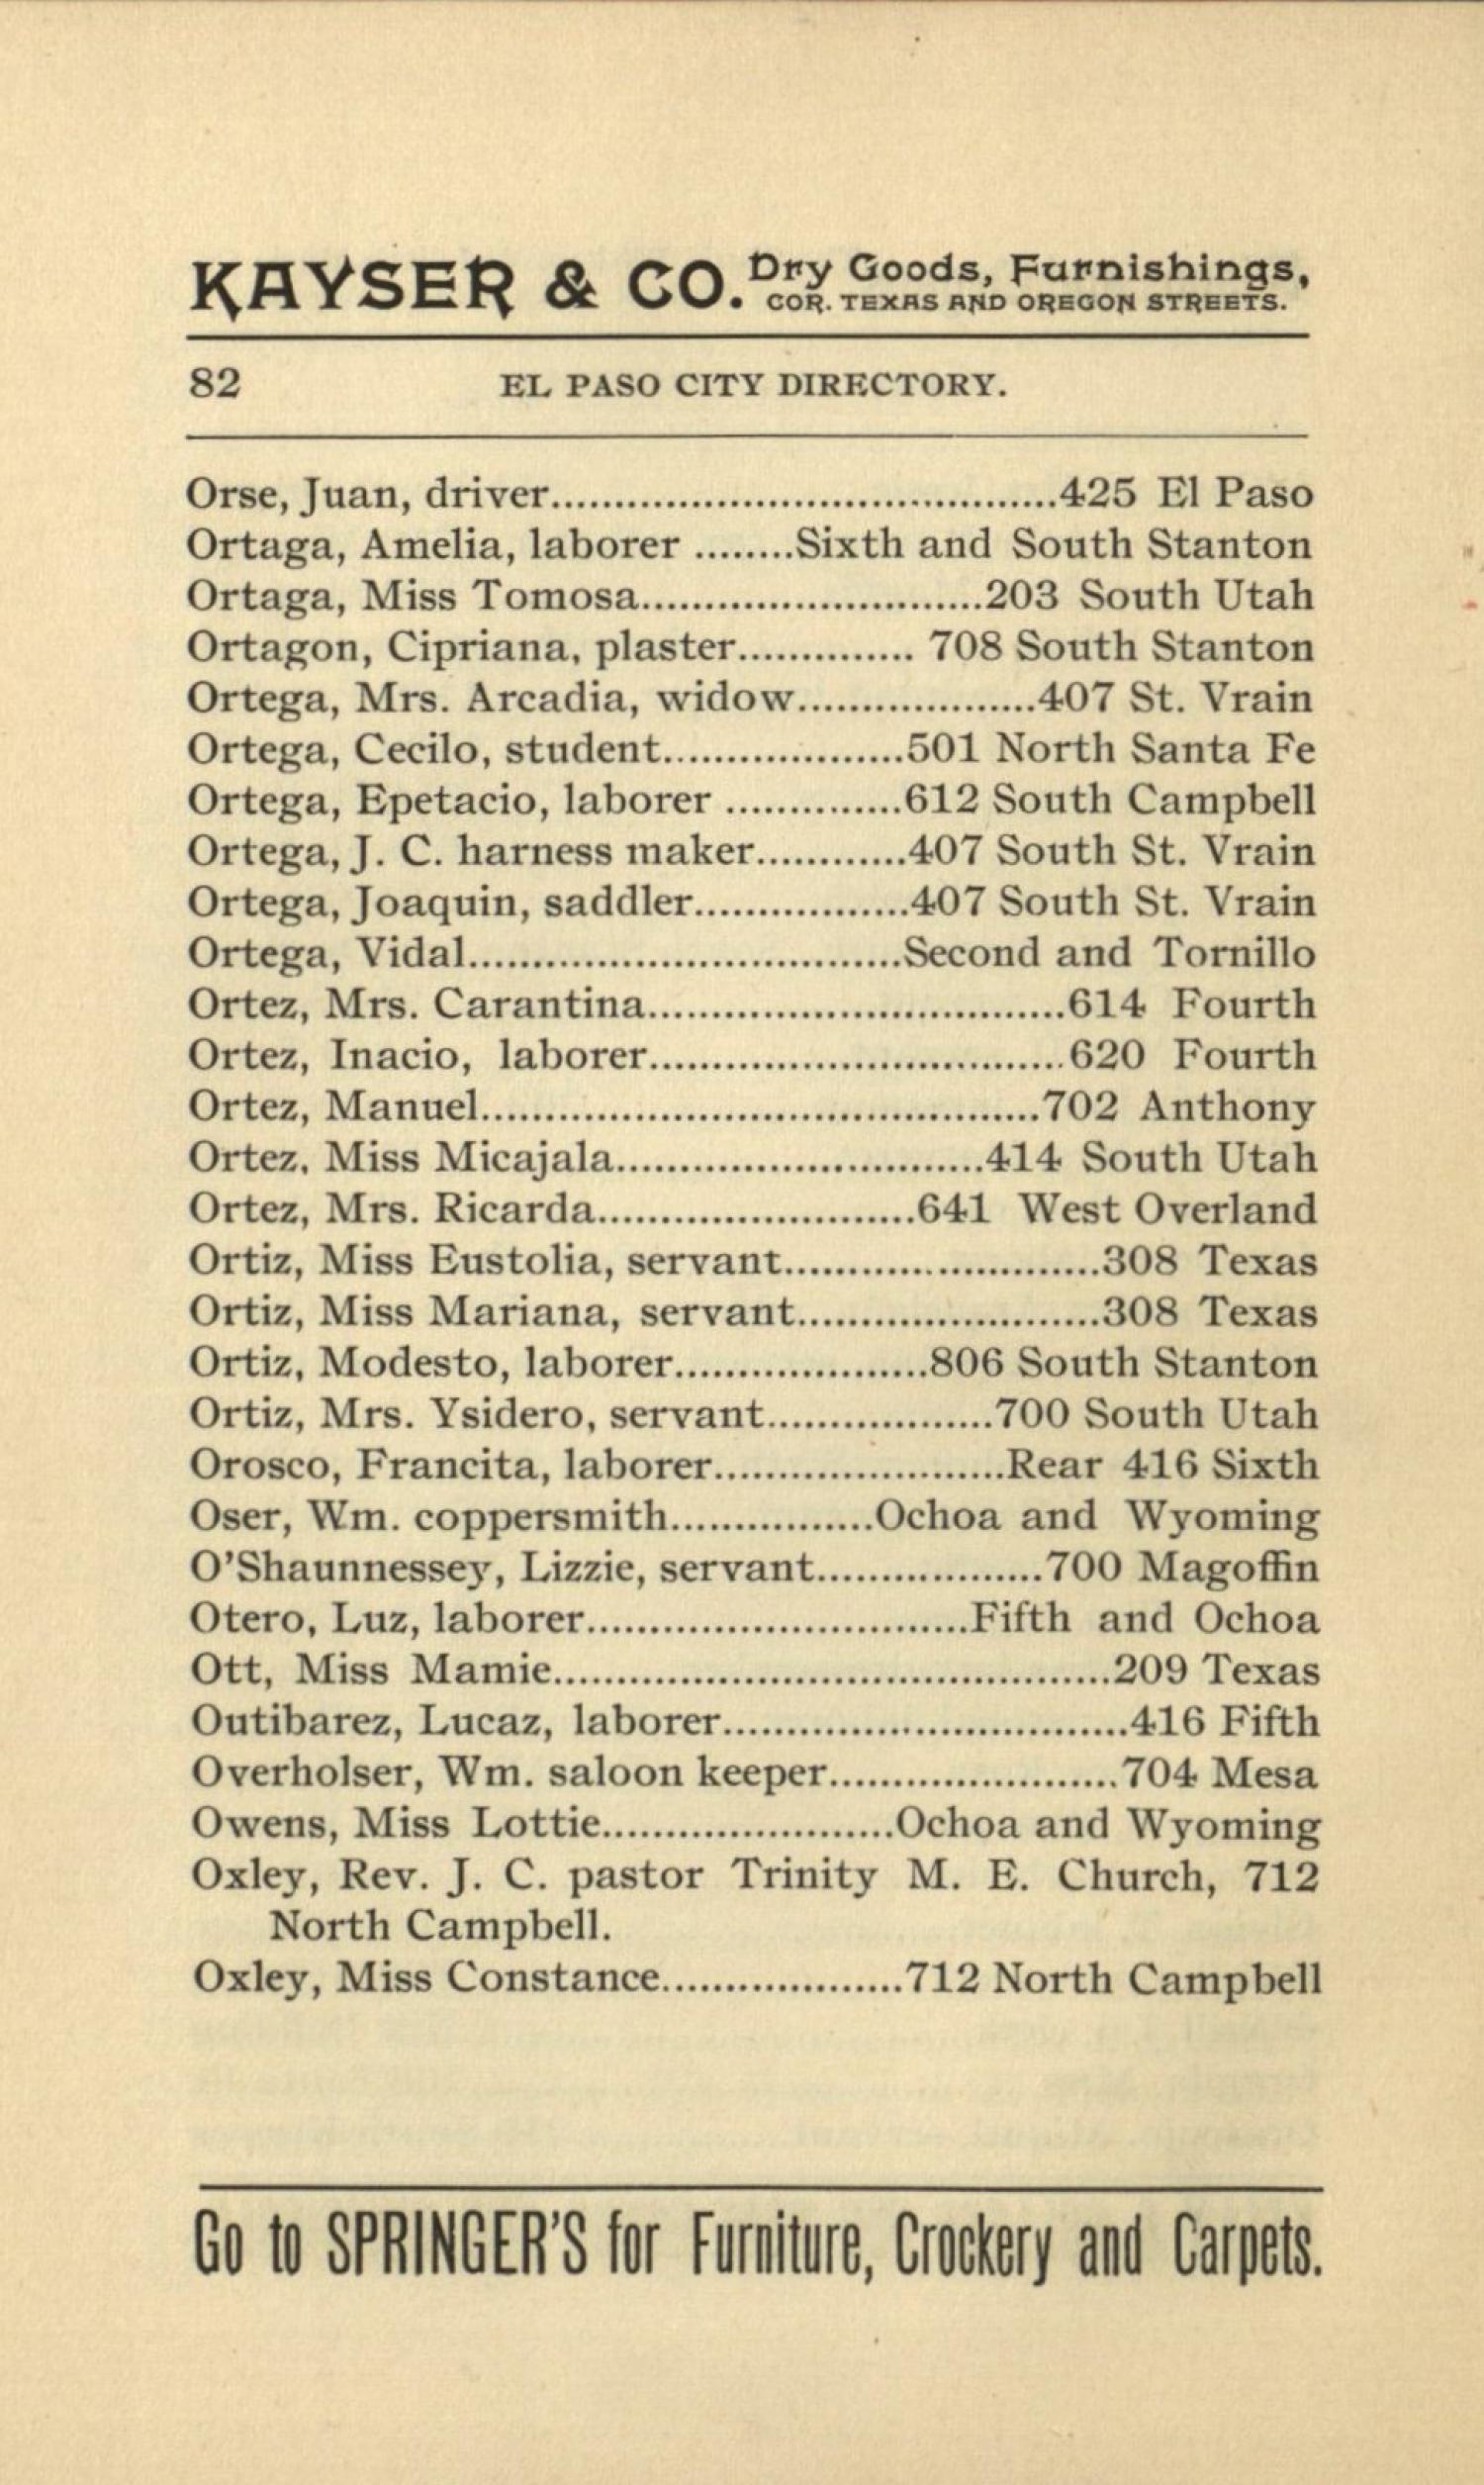 El Paso City Directory for the Years 1895 - 1896
                                                
                                                    82
                                                